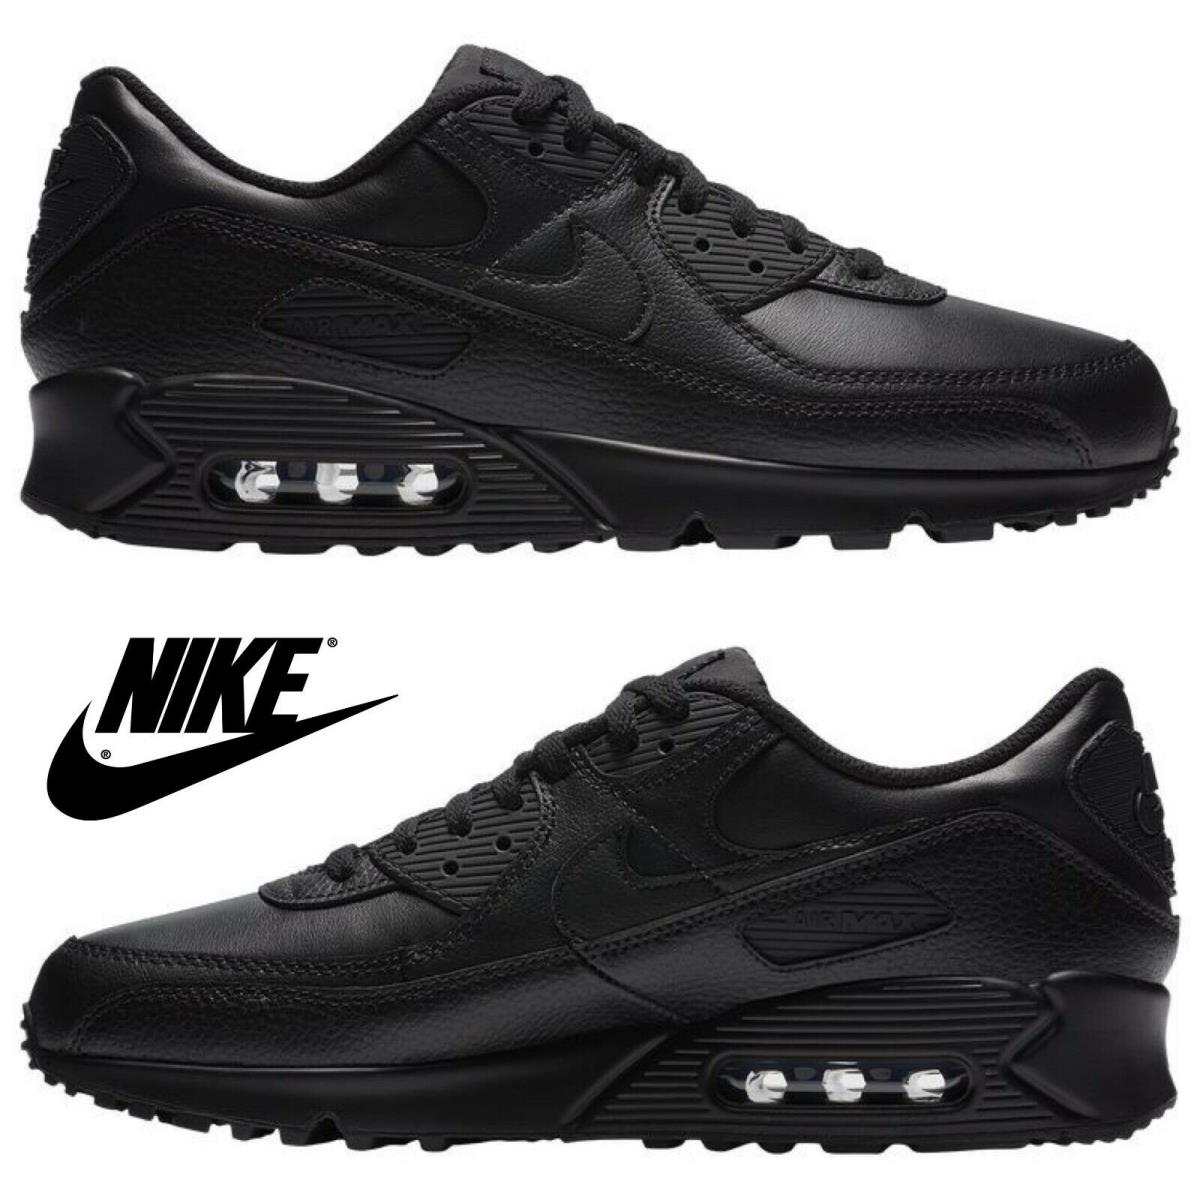 Nike Air Max 90 Casual Men`s Sneakers Running Sport Comfort Shoes Black Leather